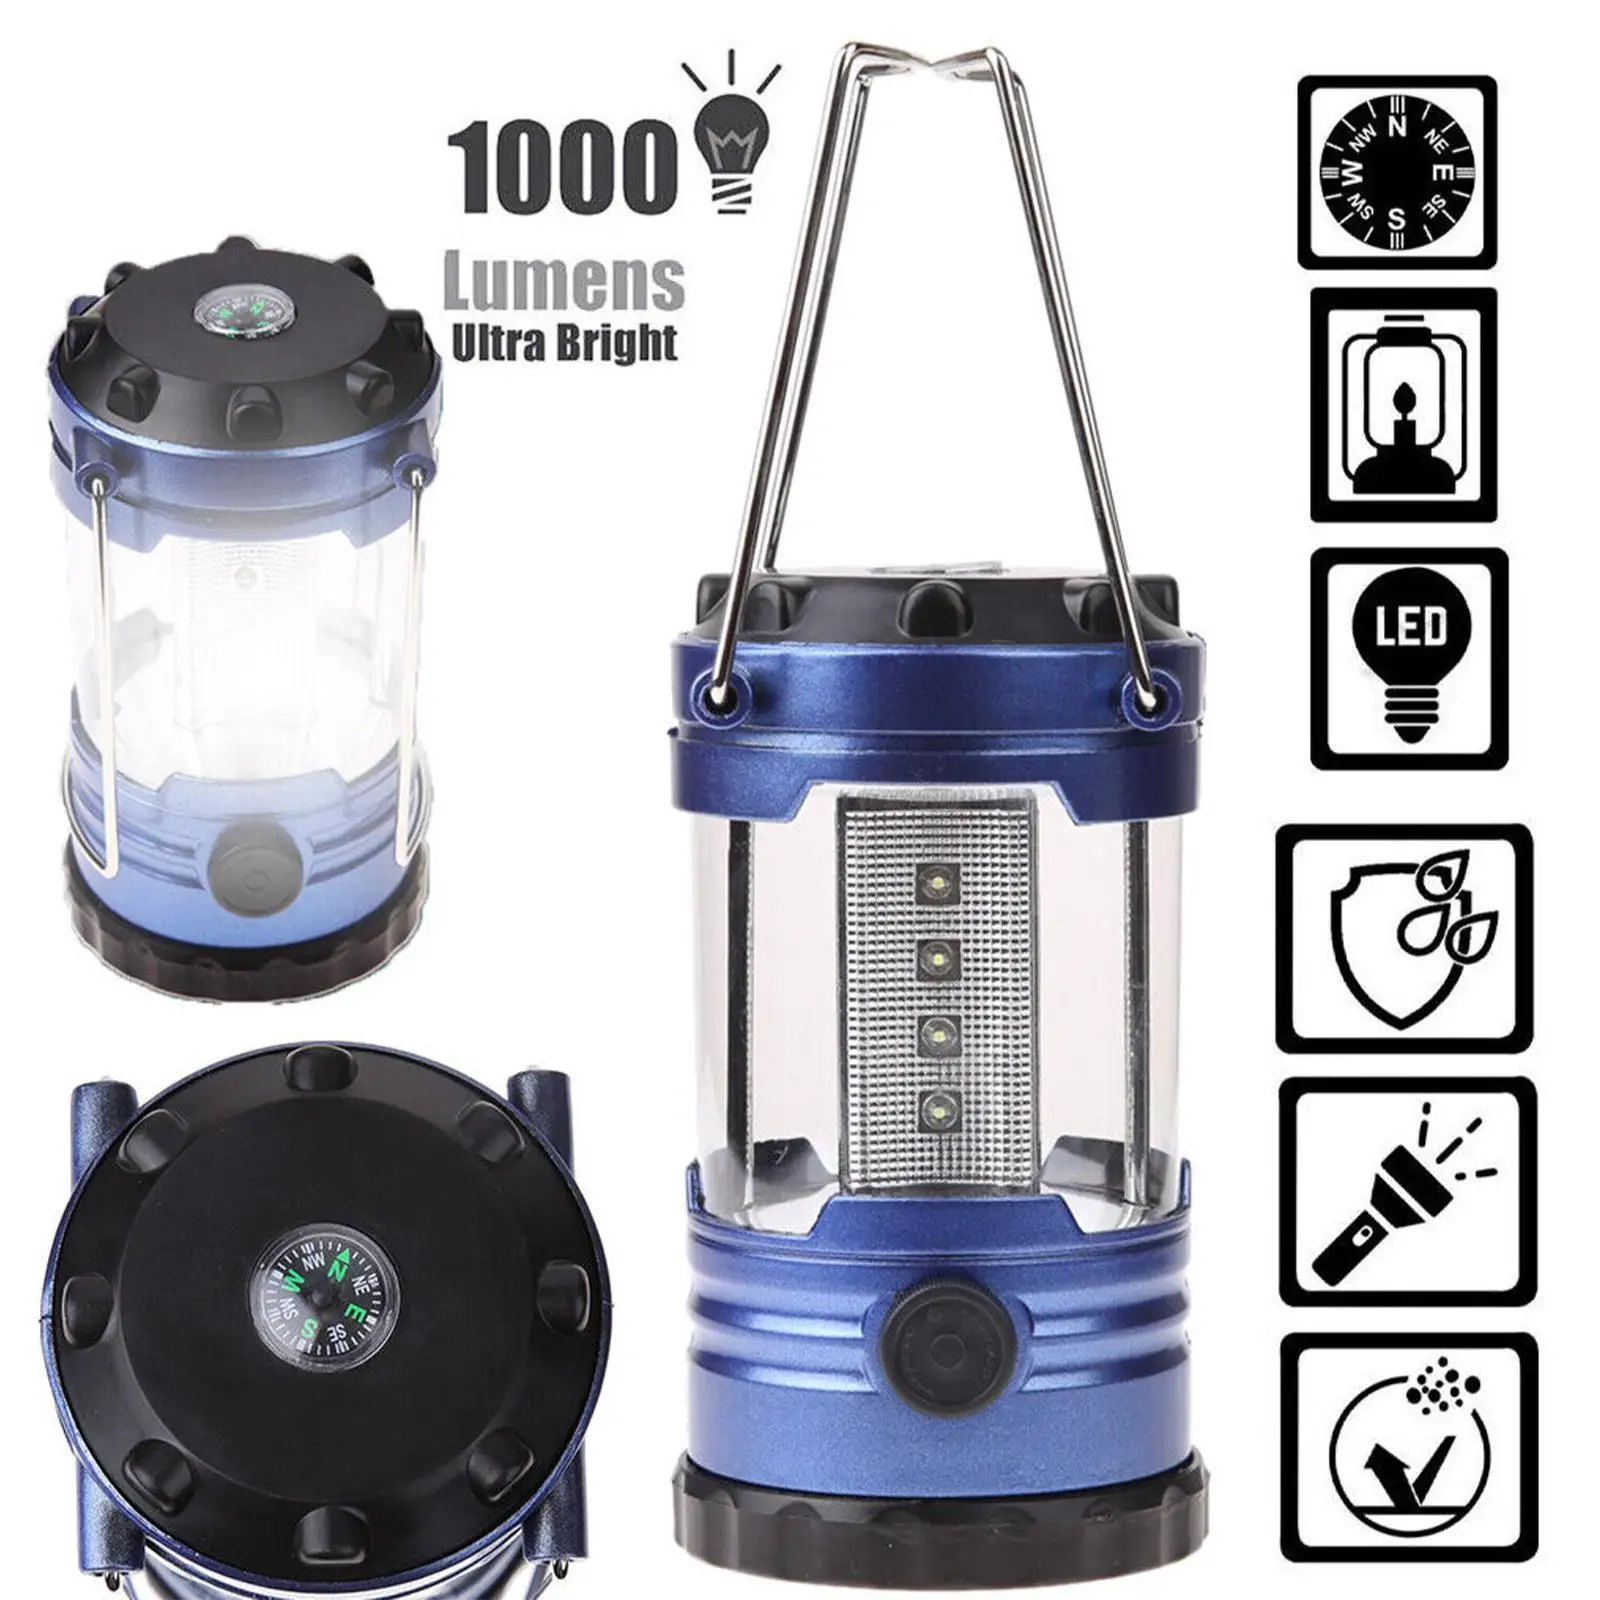 

Camping Lantern Adjustable LED Emergency Light Hiking Bivouac Garden Portable Tent Lamp With Compass Outdoor Picnic BBQ Supplies